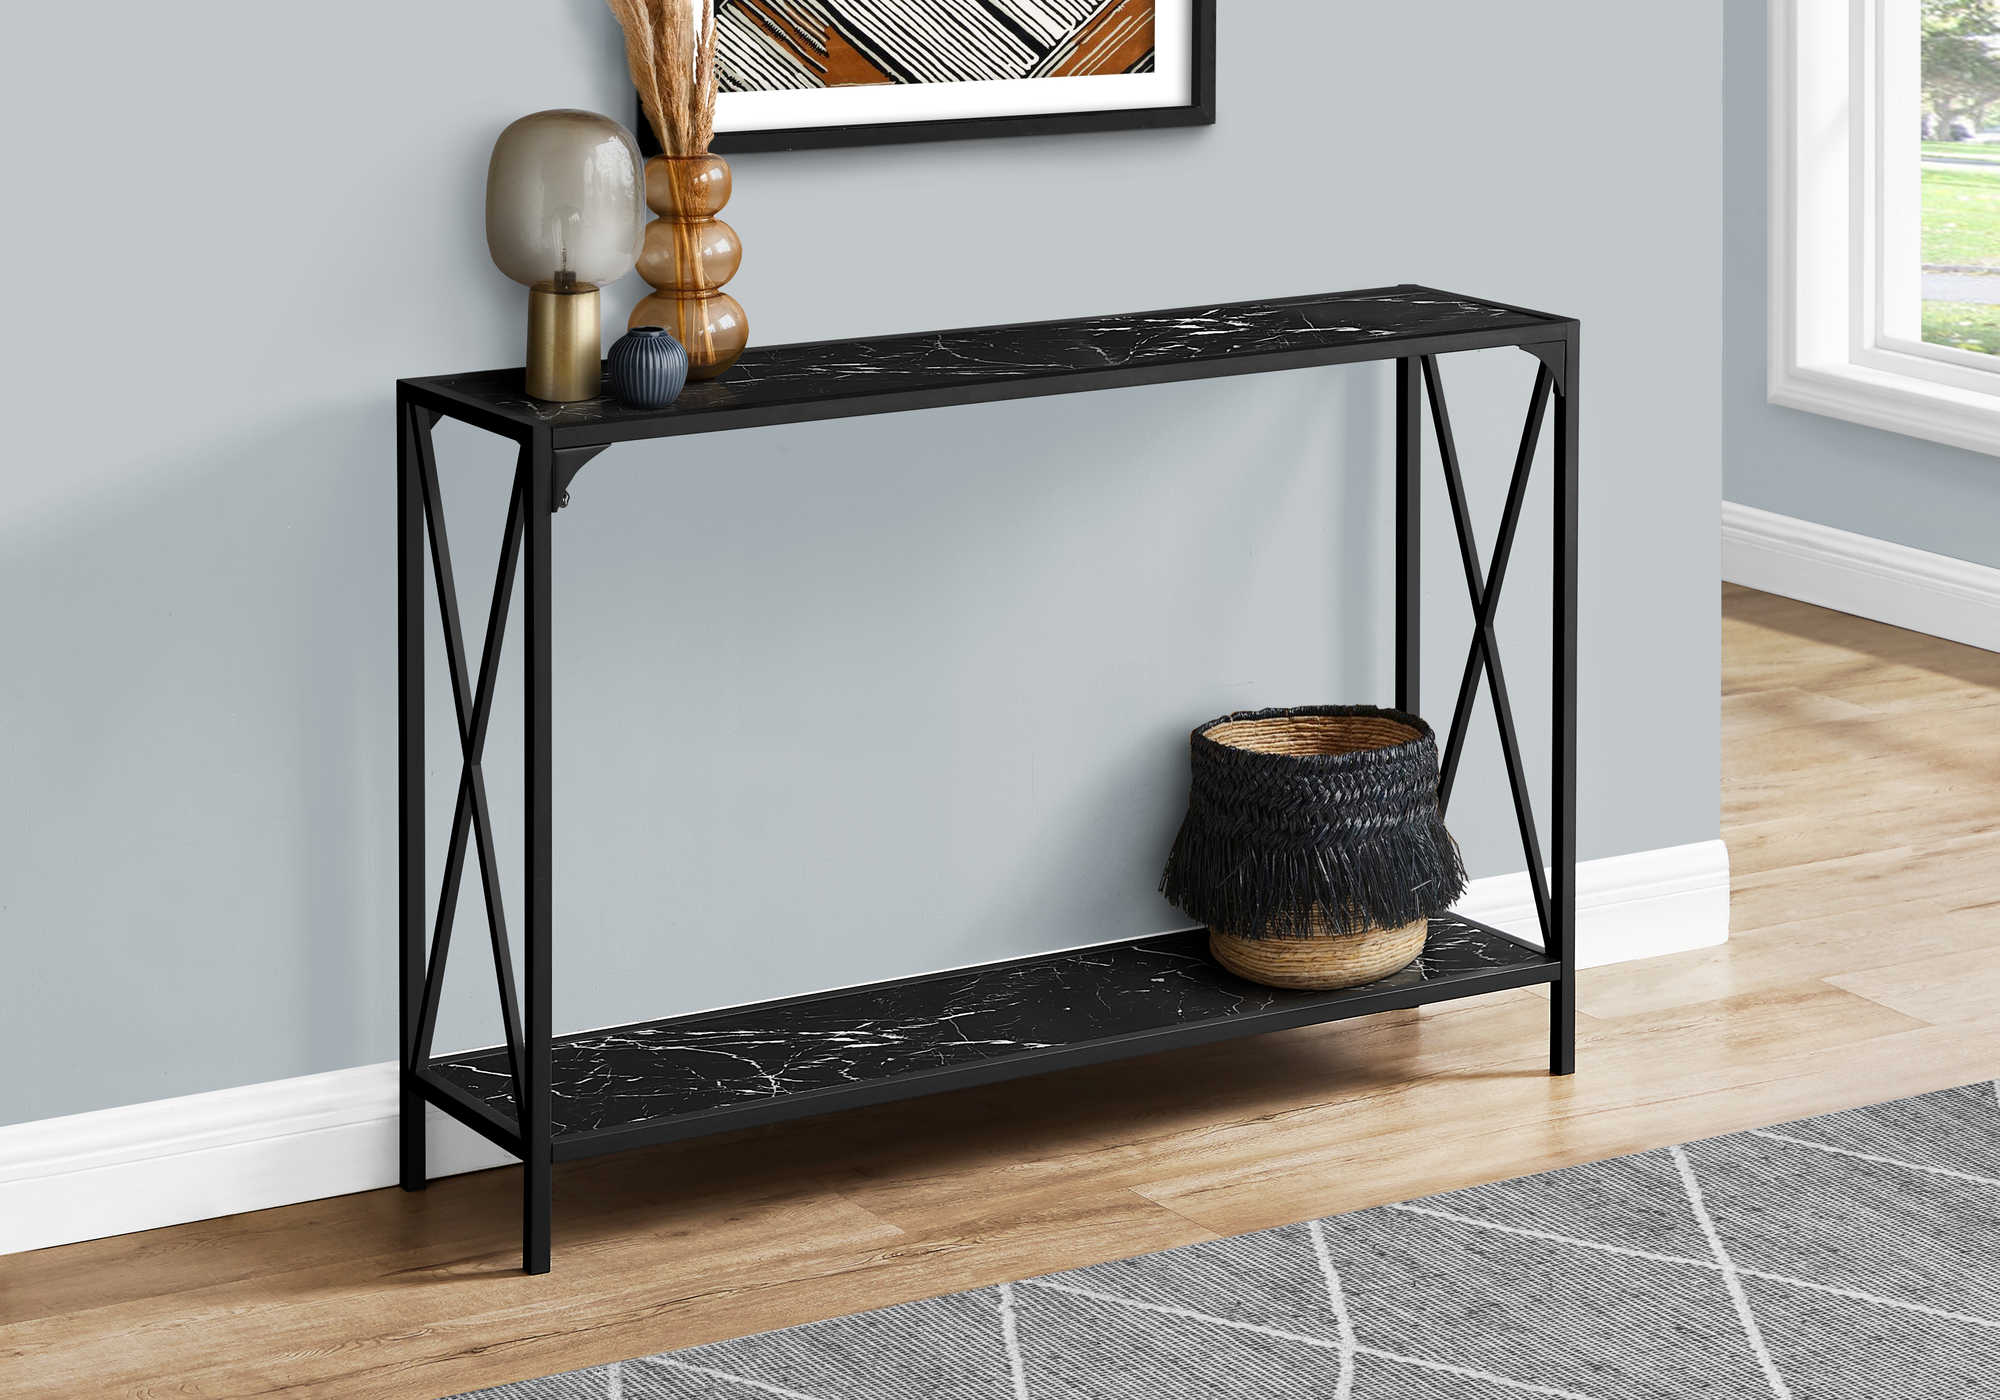 I 2126 - ACCENT TABLE - 48"L / BLACK MARBLE / BLACK HALL CONSOLE BY MONARCH SPECIALTIES INC